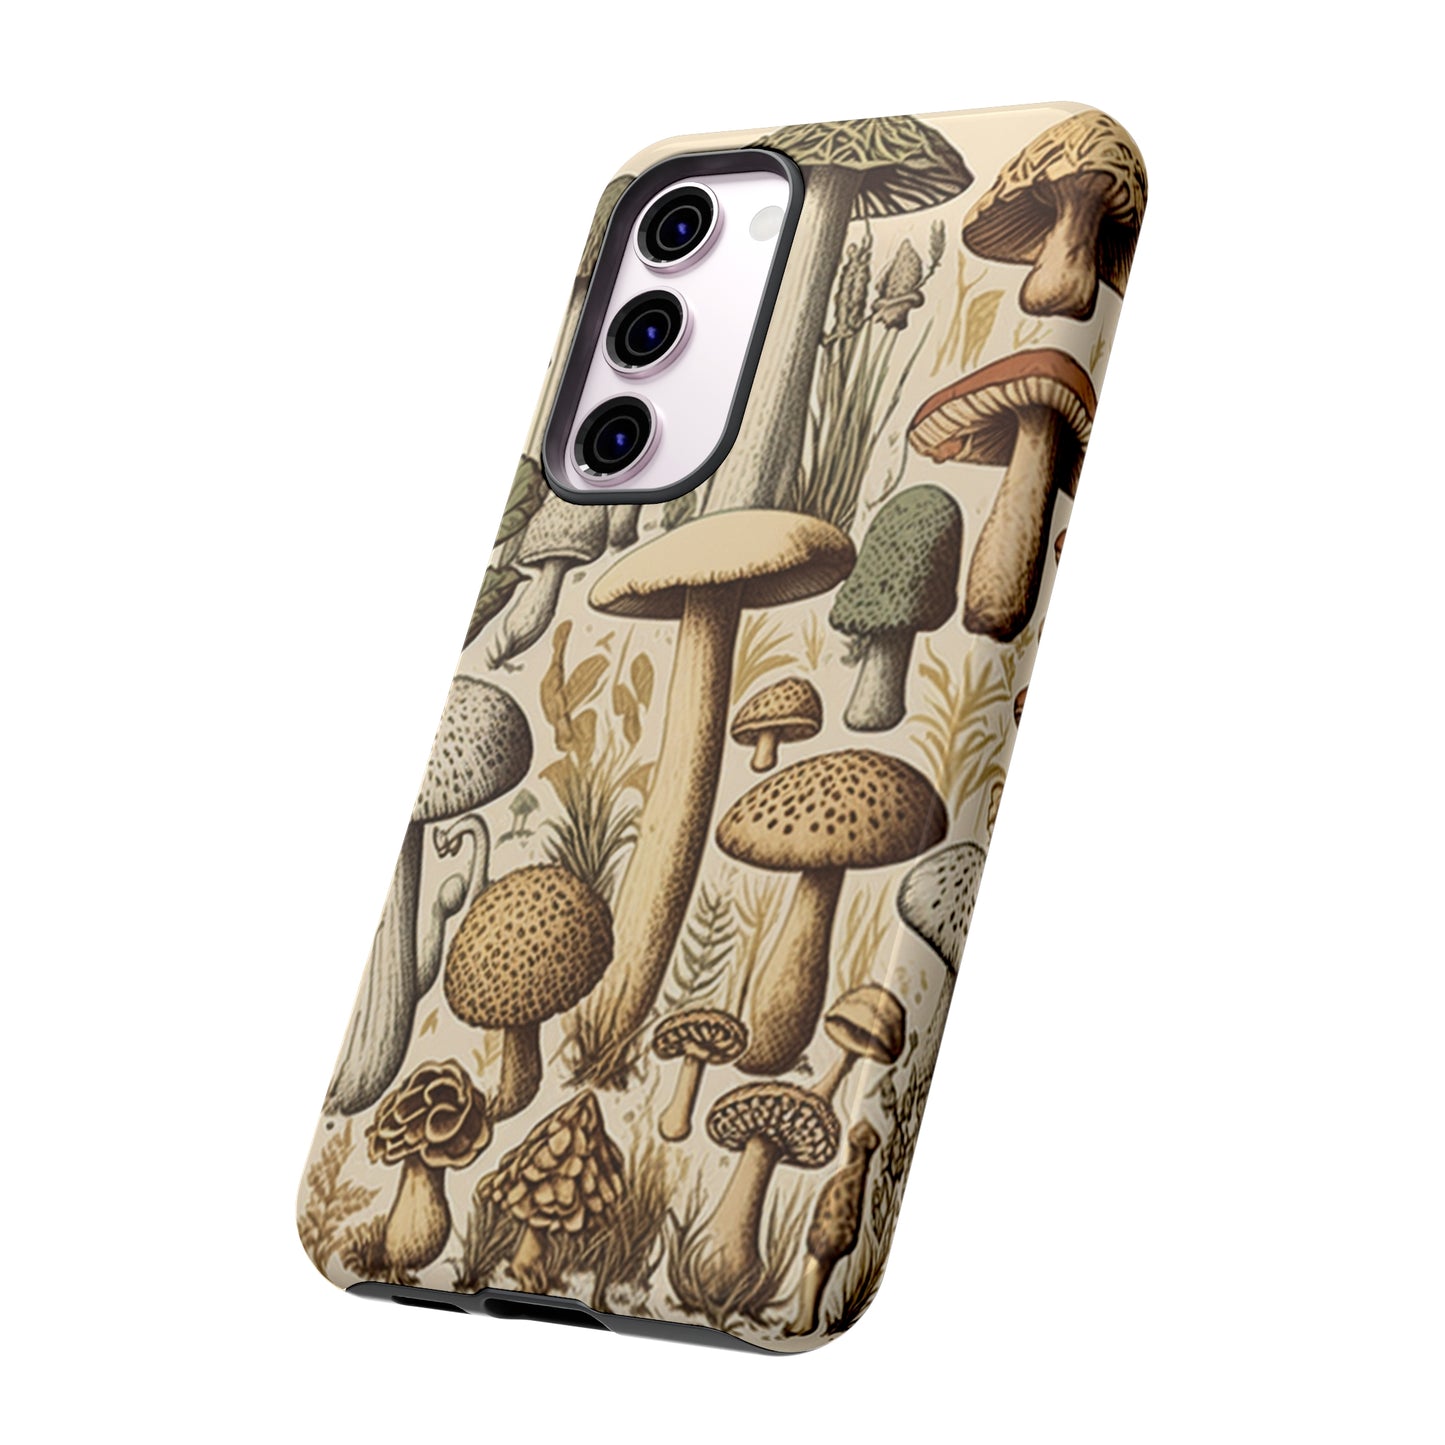 Illustrated  Mushroom iPhone Case Vintage Style Art Tough Case for Samsung Galaxy and Pixel - Trippy Protection